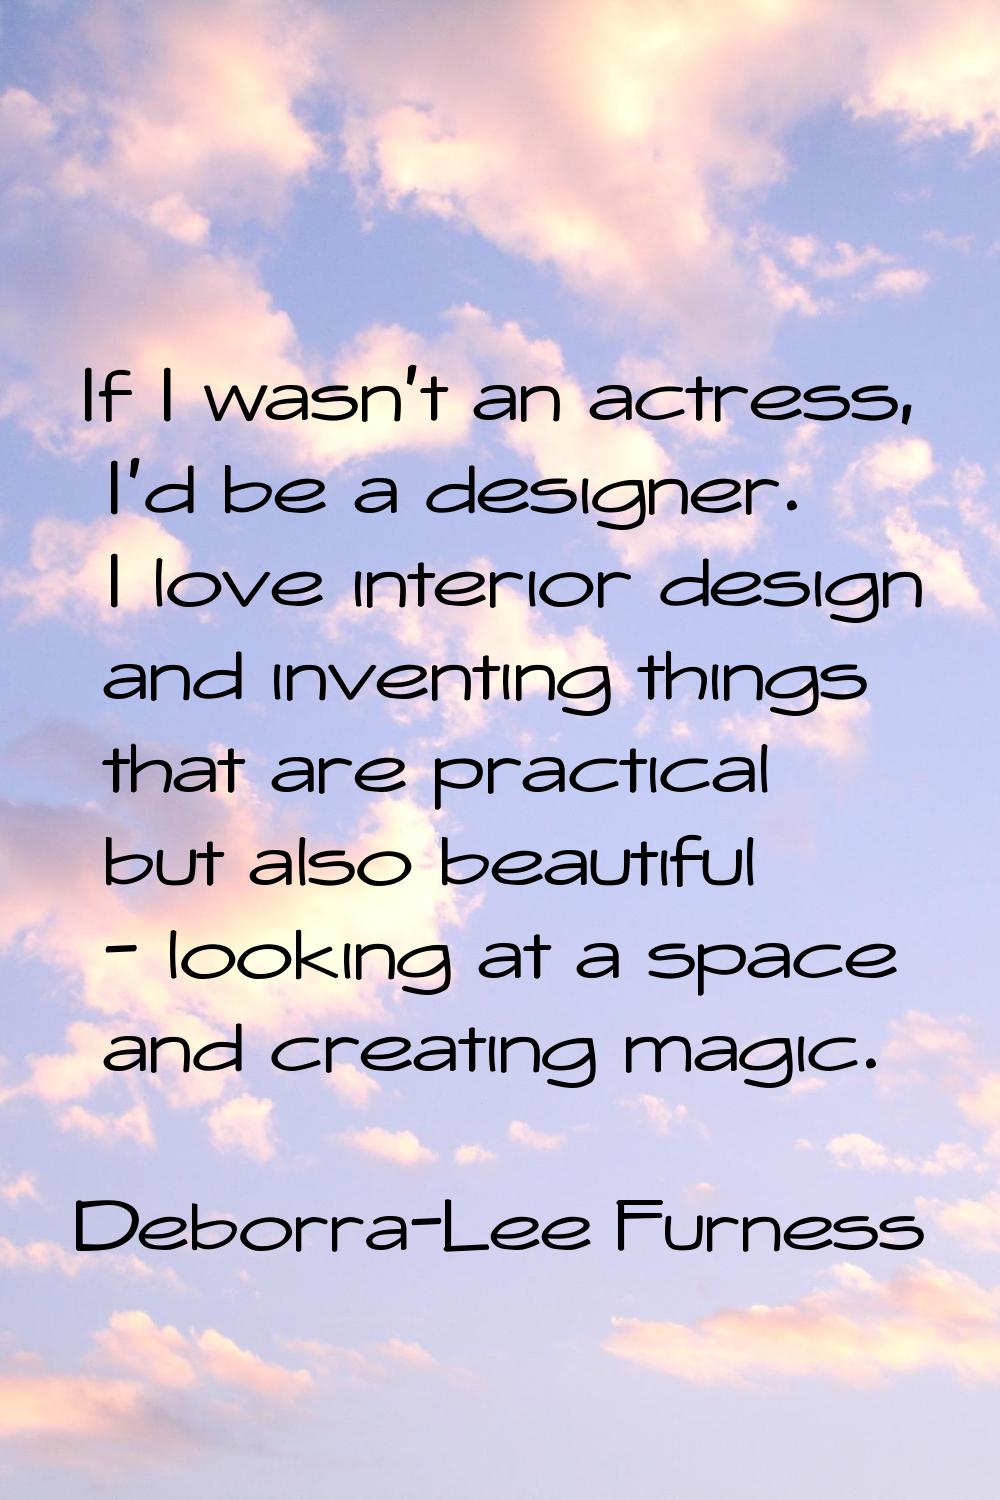 If I wasn't an actress, I'd be a designer. I love interior design and inventing things that are pra